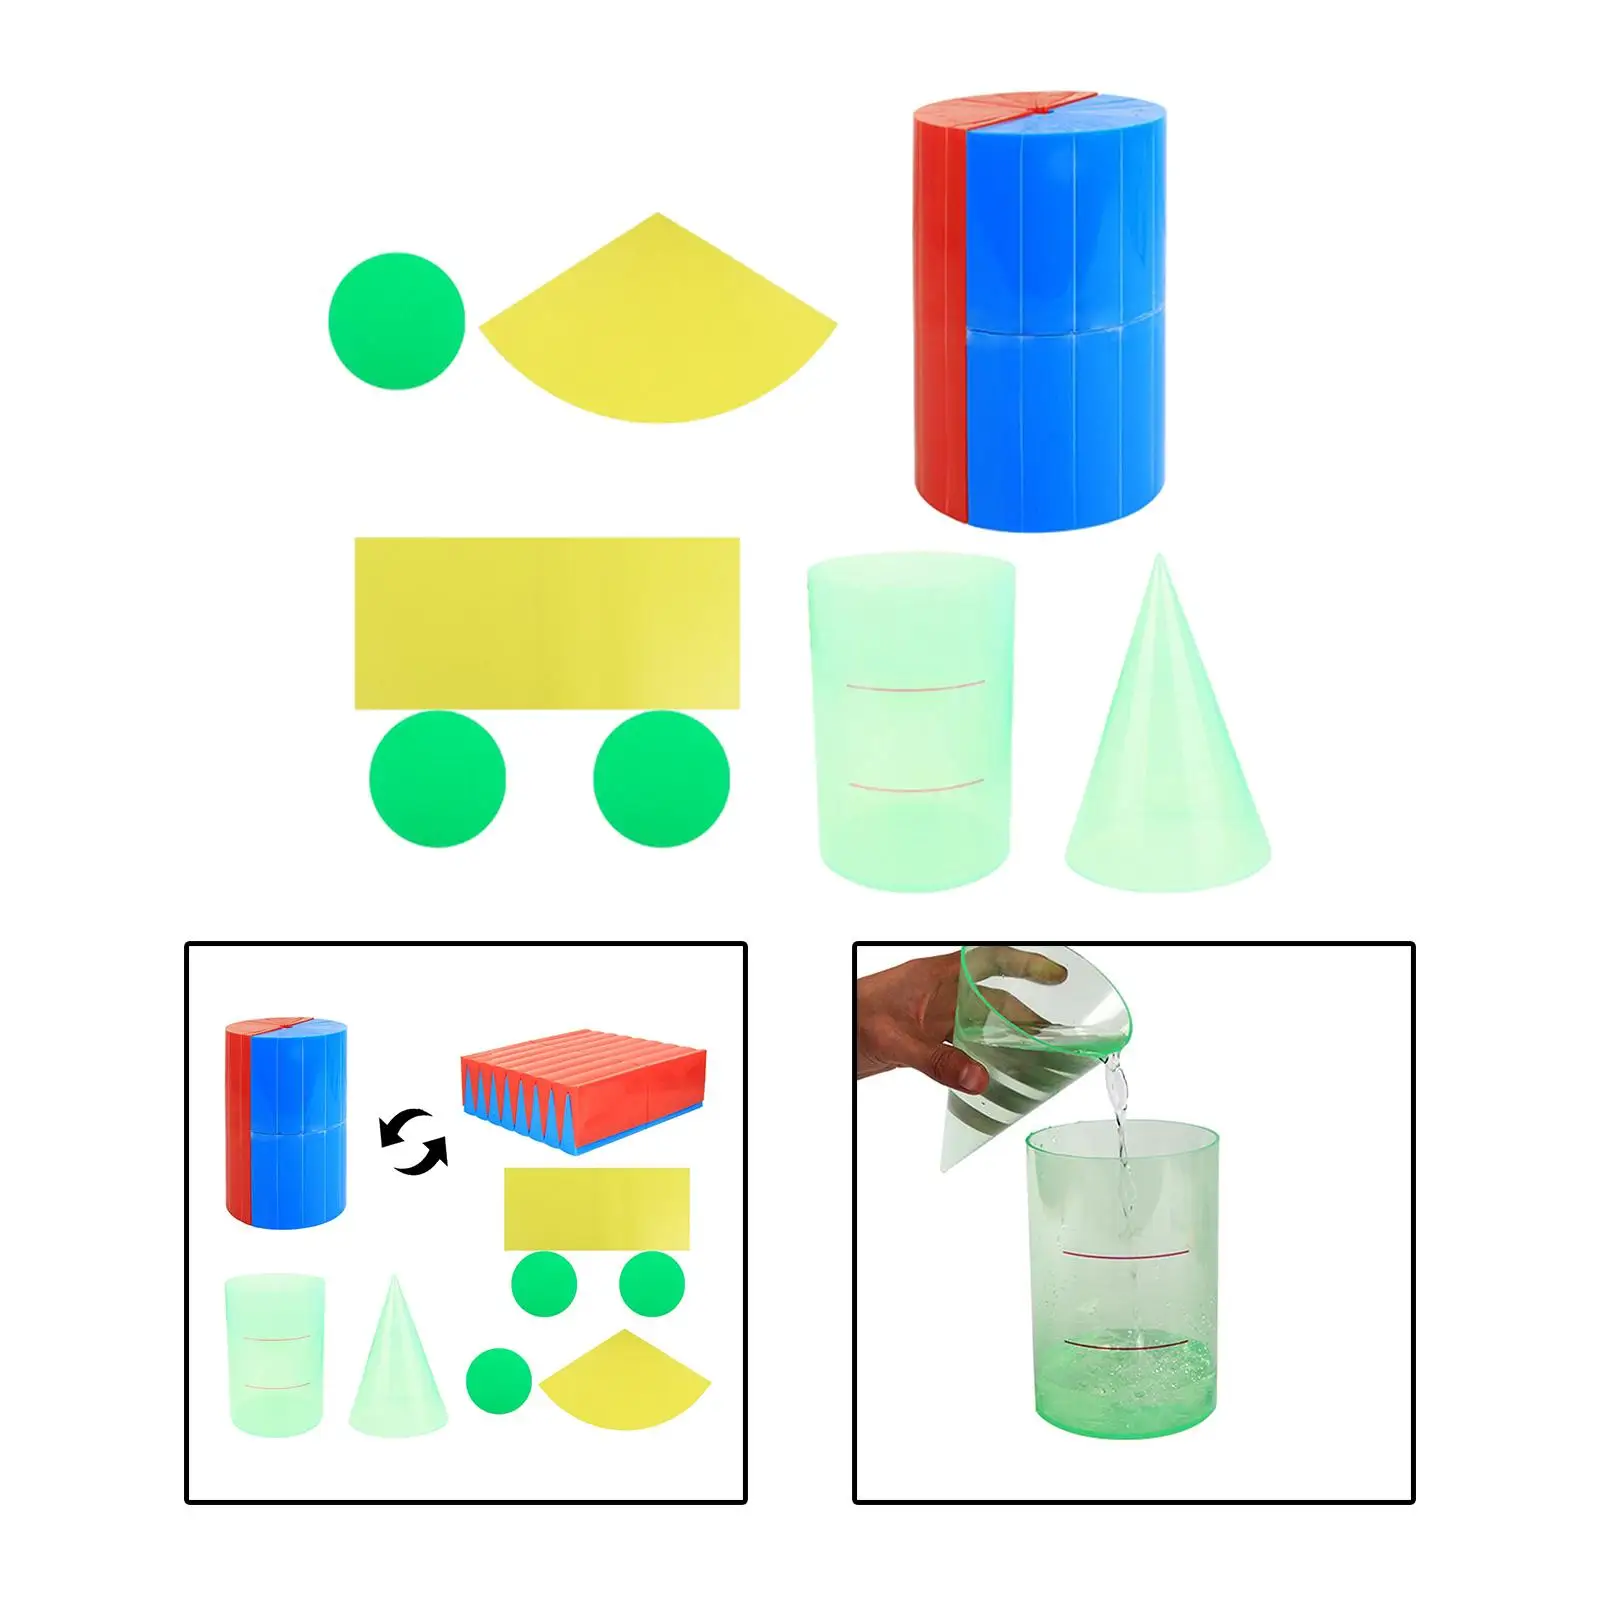 3D Shapes Geometric Learning Toys Learning Material Geometry Math Mathematics Teaching Aids Math for Kids 10 11 12 Holiday Gifts